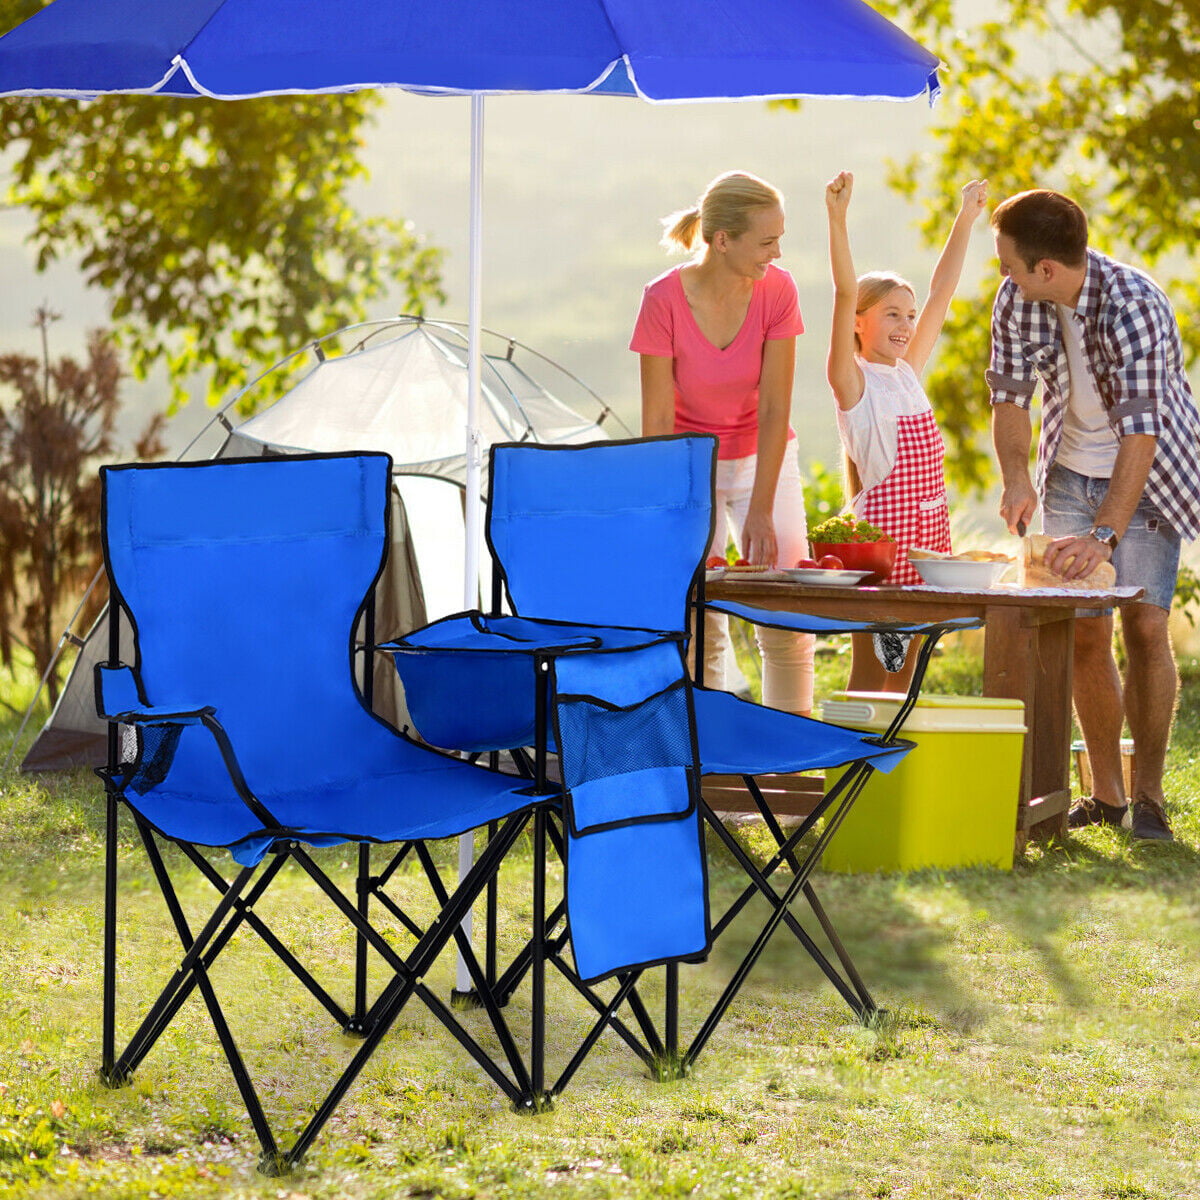 Beach Chair Set Outdoors Picnic Double Folding w/ Umbrella Table Cooler Fold Up 